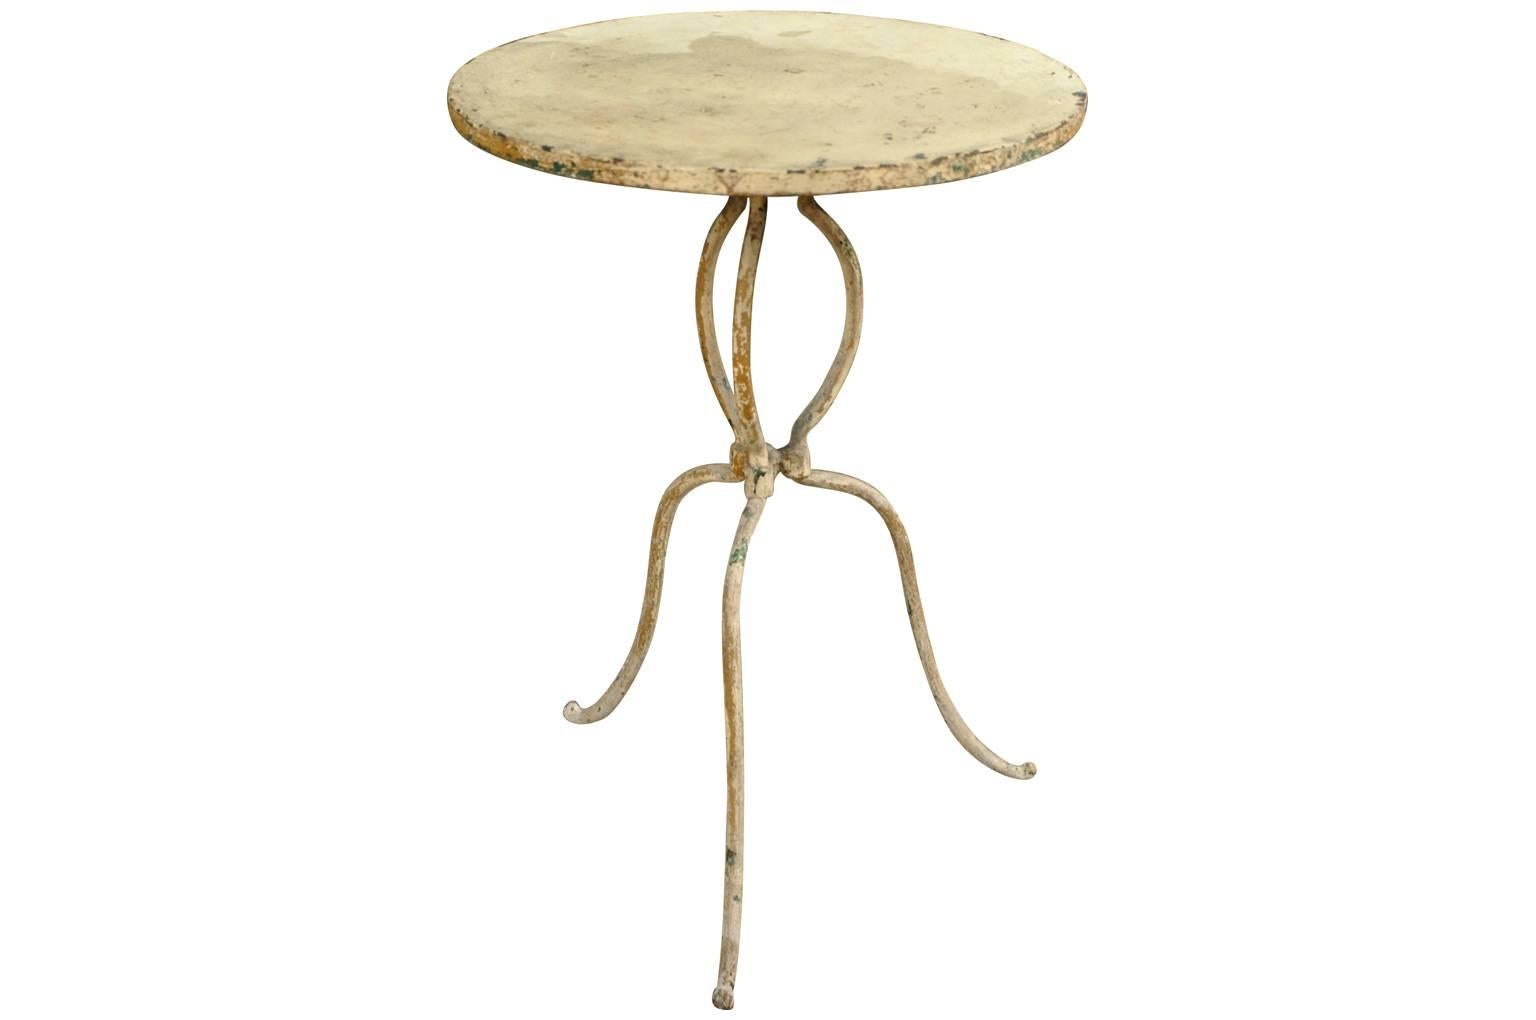 A very charming later 19th century garden gueridon - bistro table from the Provenance region of France. Wonderfully made from painted iron. Especially nice is the table's diminutive size. A lovely piece for any interior or garden.